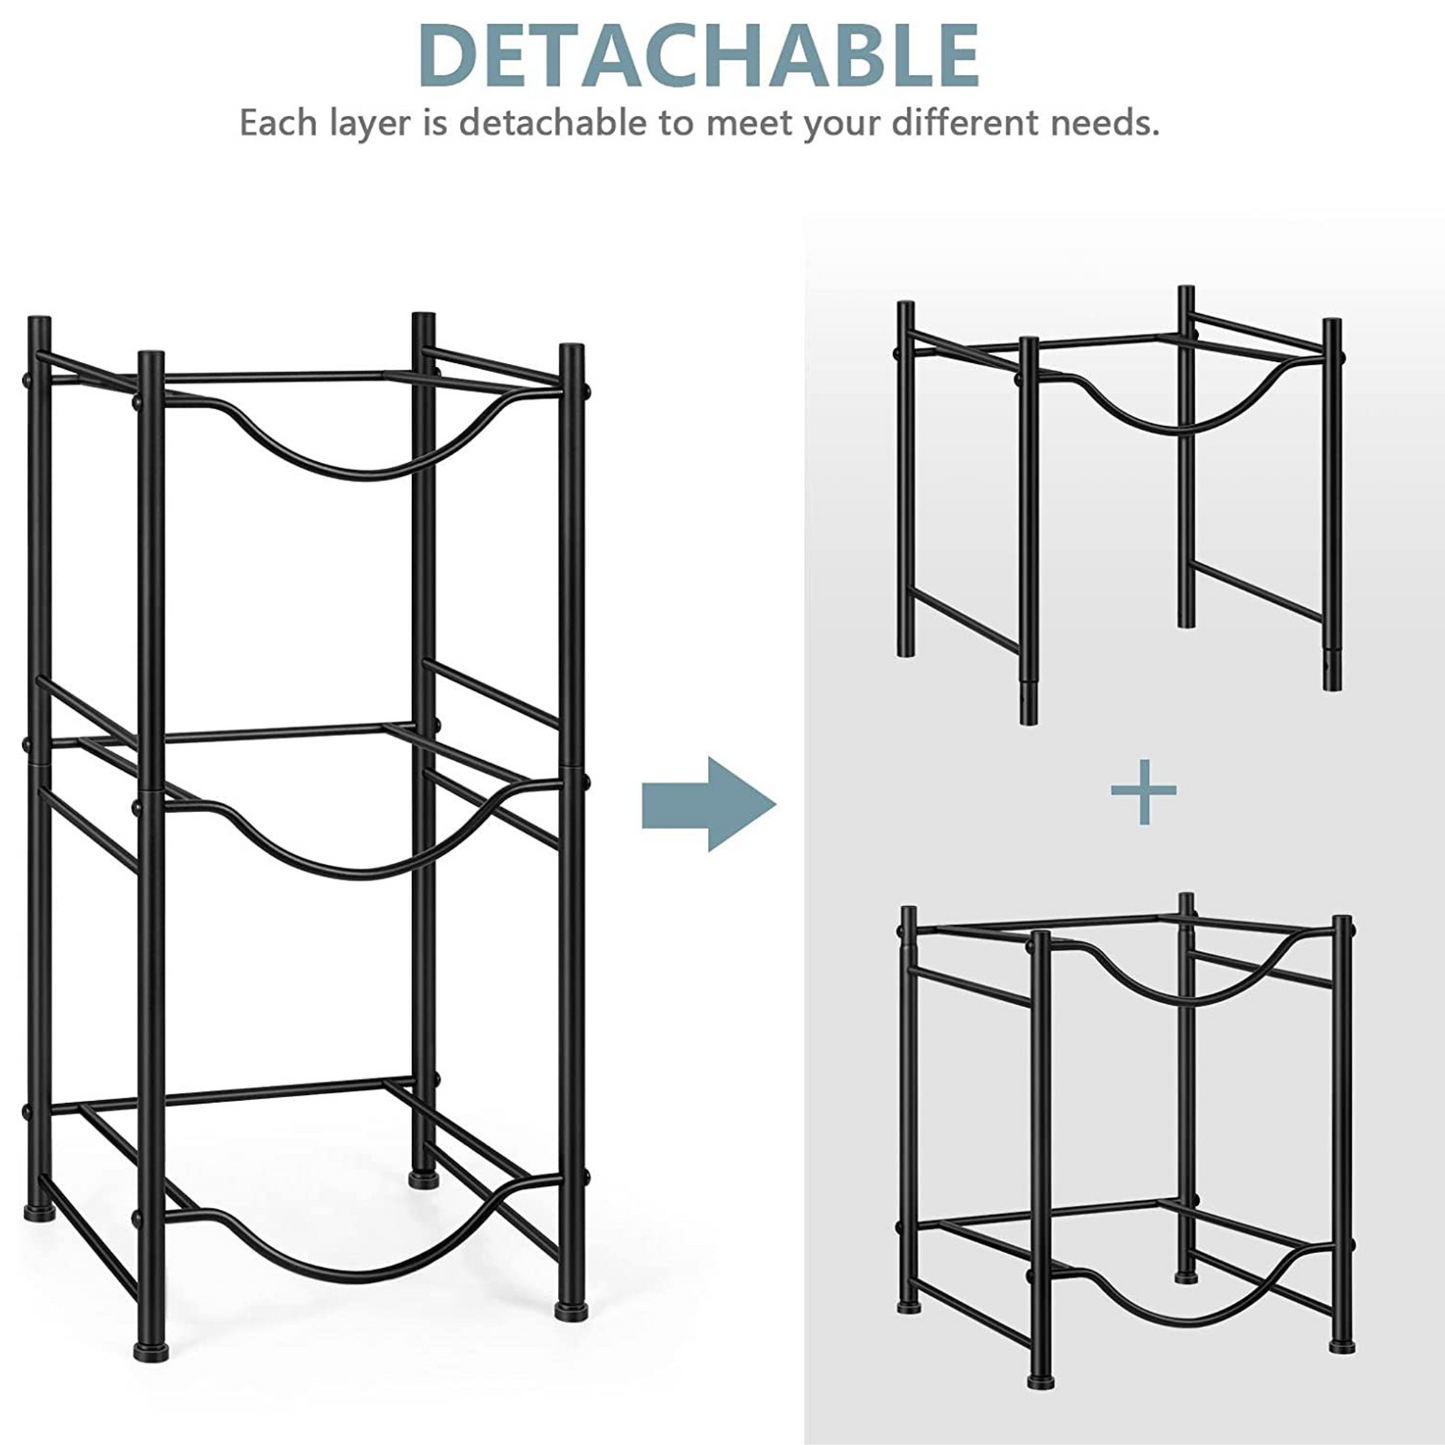 Keep your space clutter-free with our 3-tier water jug rack. Made of premium steel in black, it's a sleek and sturdy solution for storing up to 5 water bottles. Perfect for your kitchen, restaurant, or office.